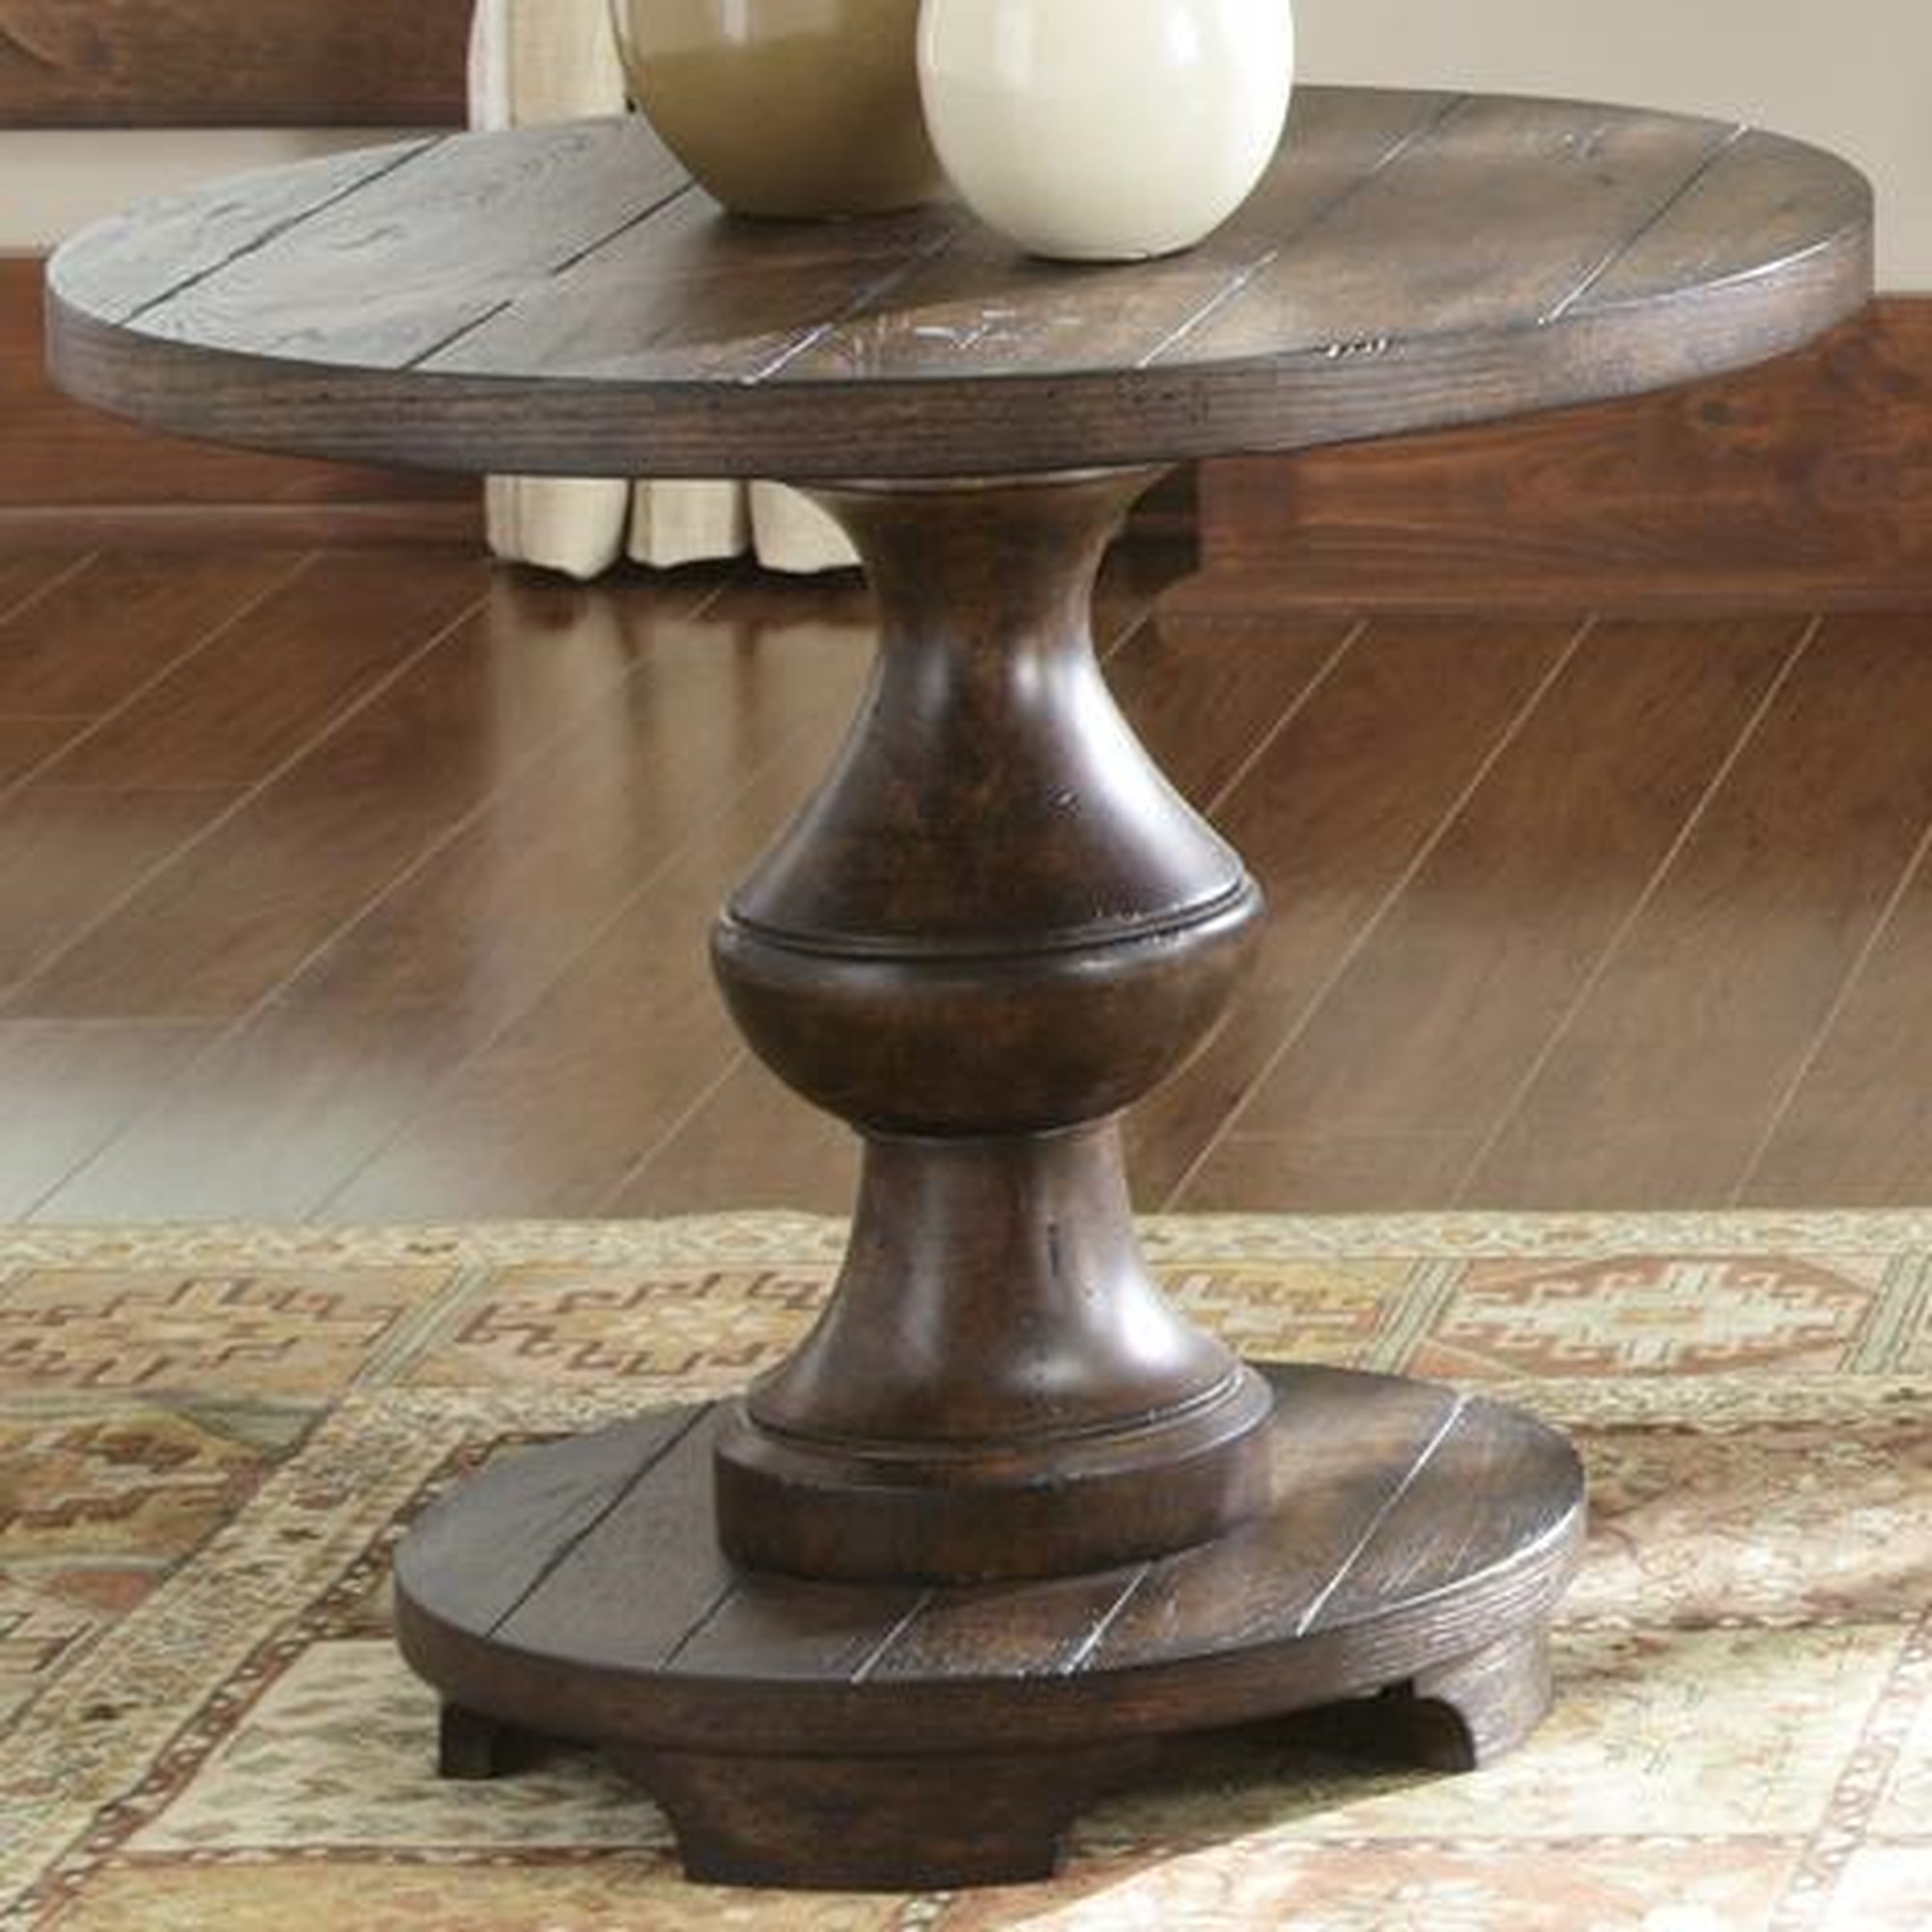 Wooden Round Side Table Classic Pedestal Base Lamp Stand Display